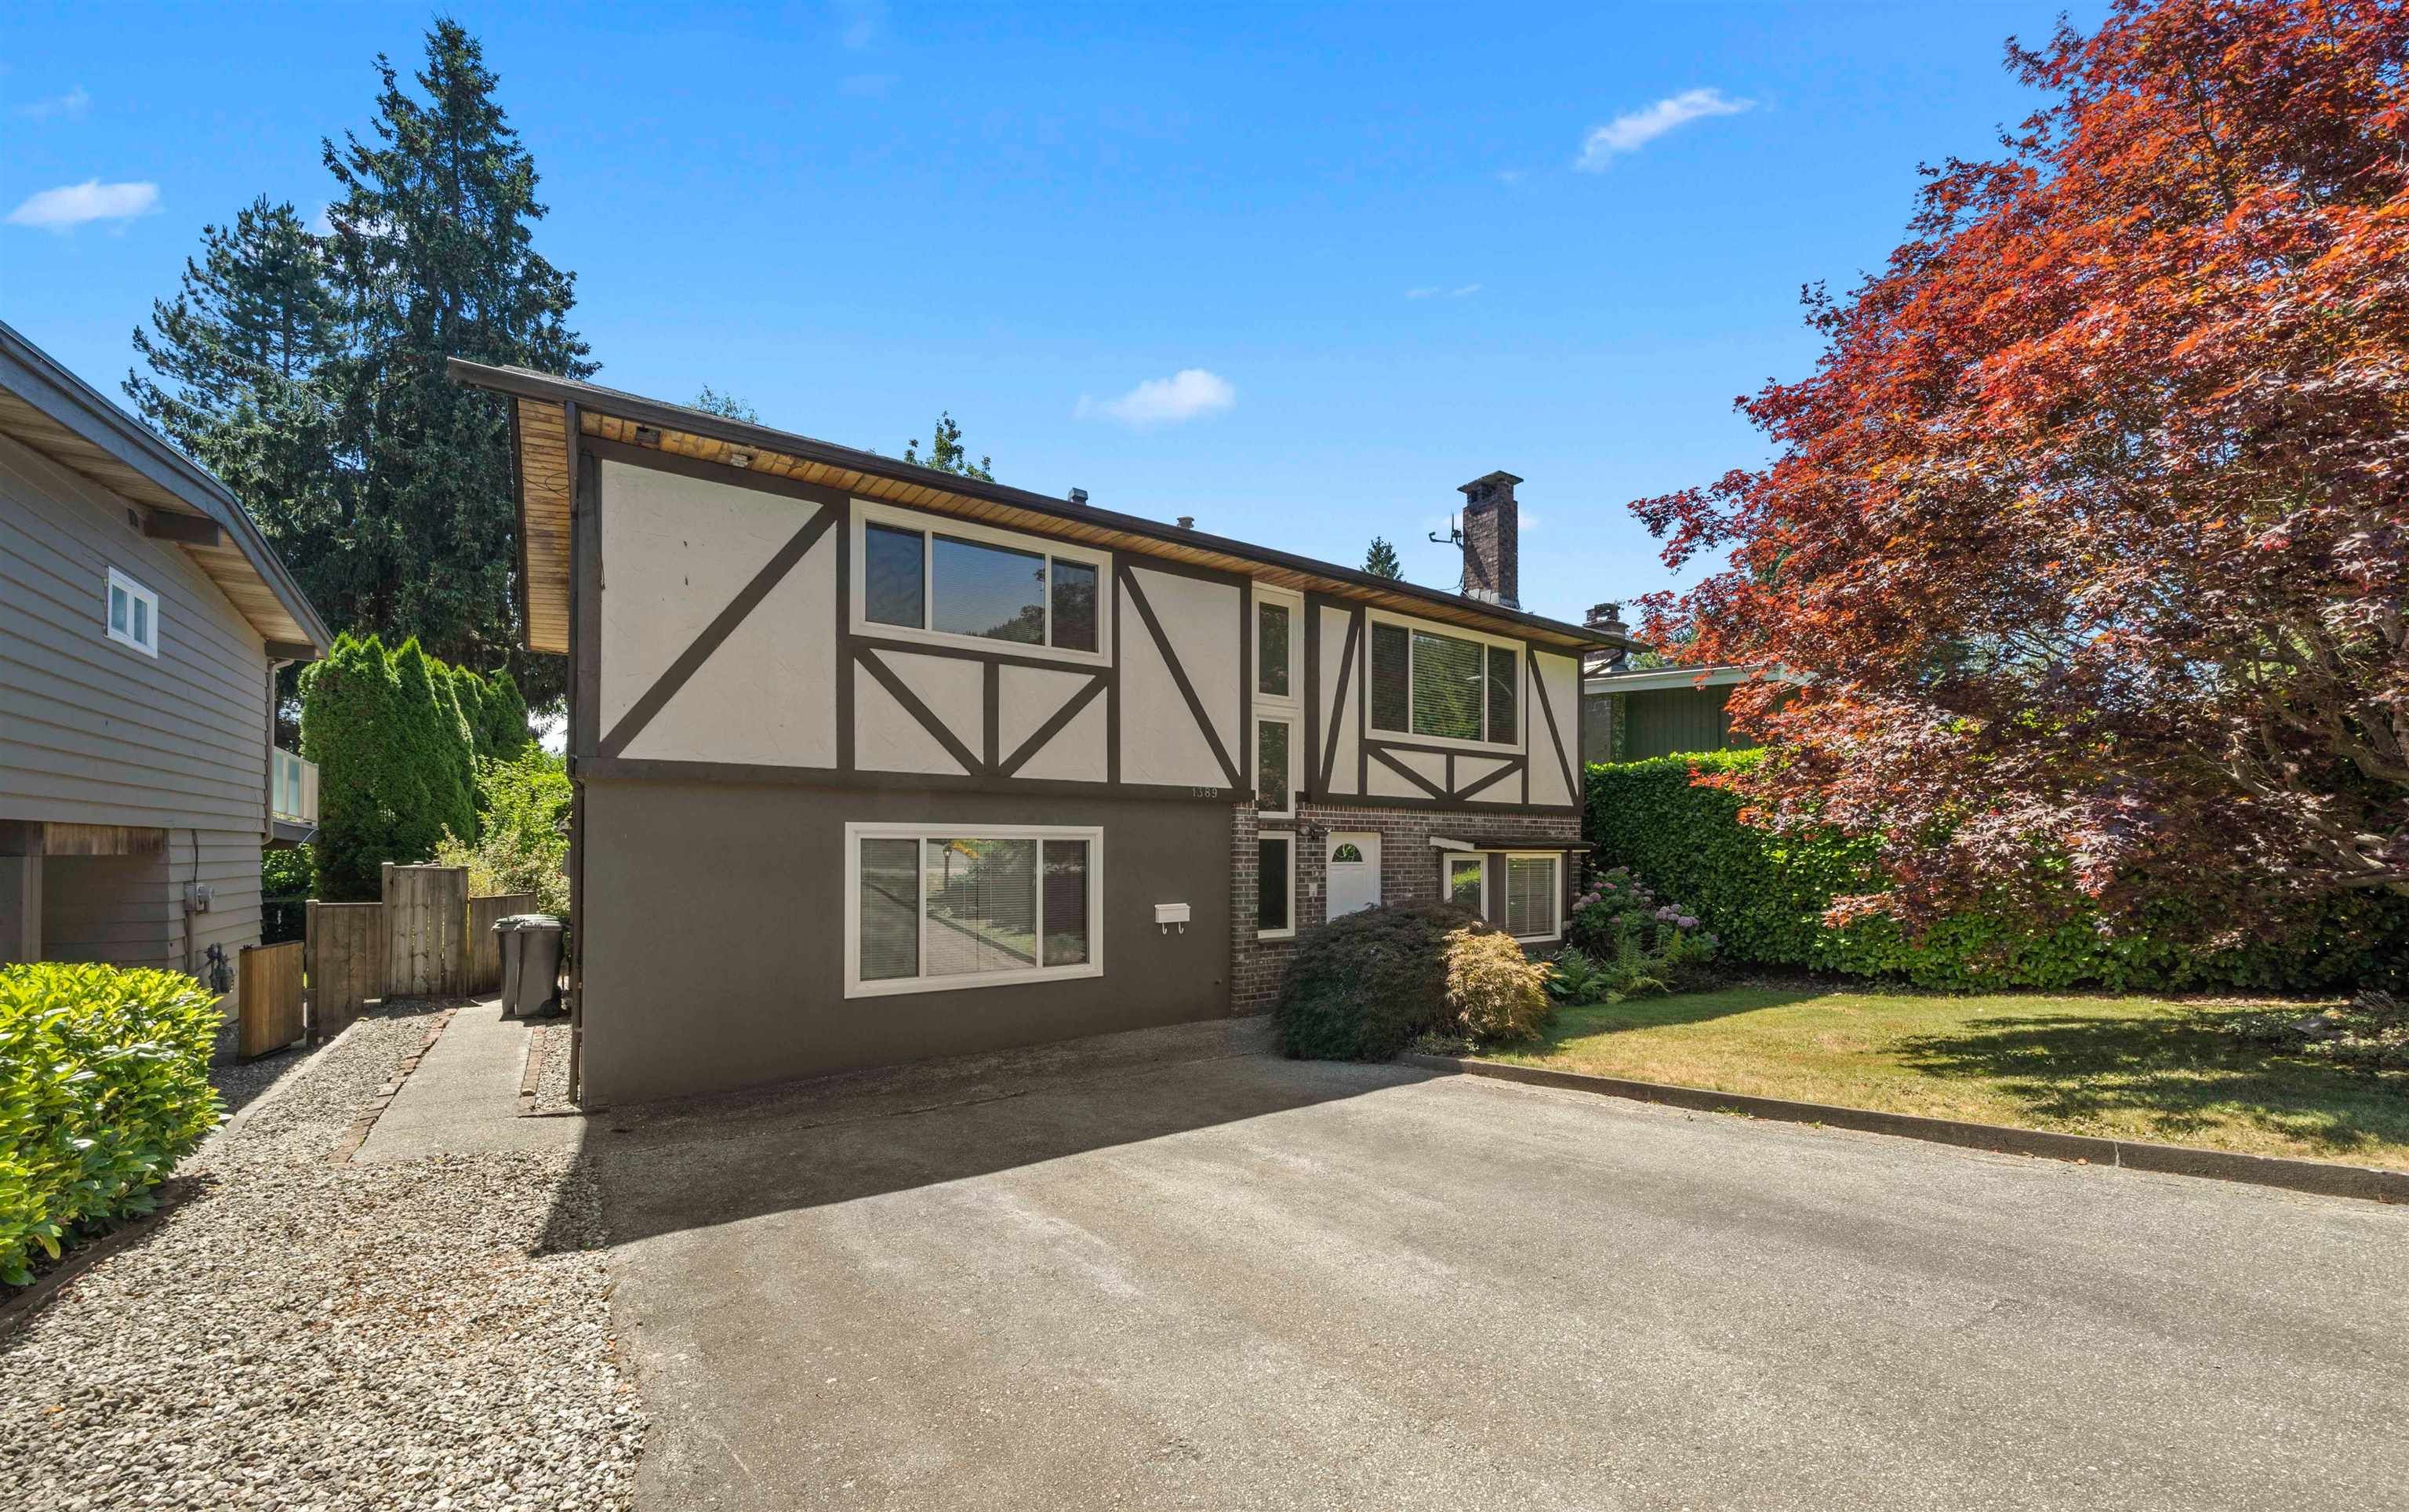 Hot new listing! Just listed in Lynn Valley, North Vancouver